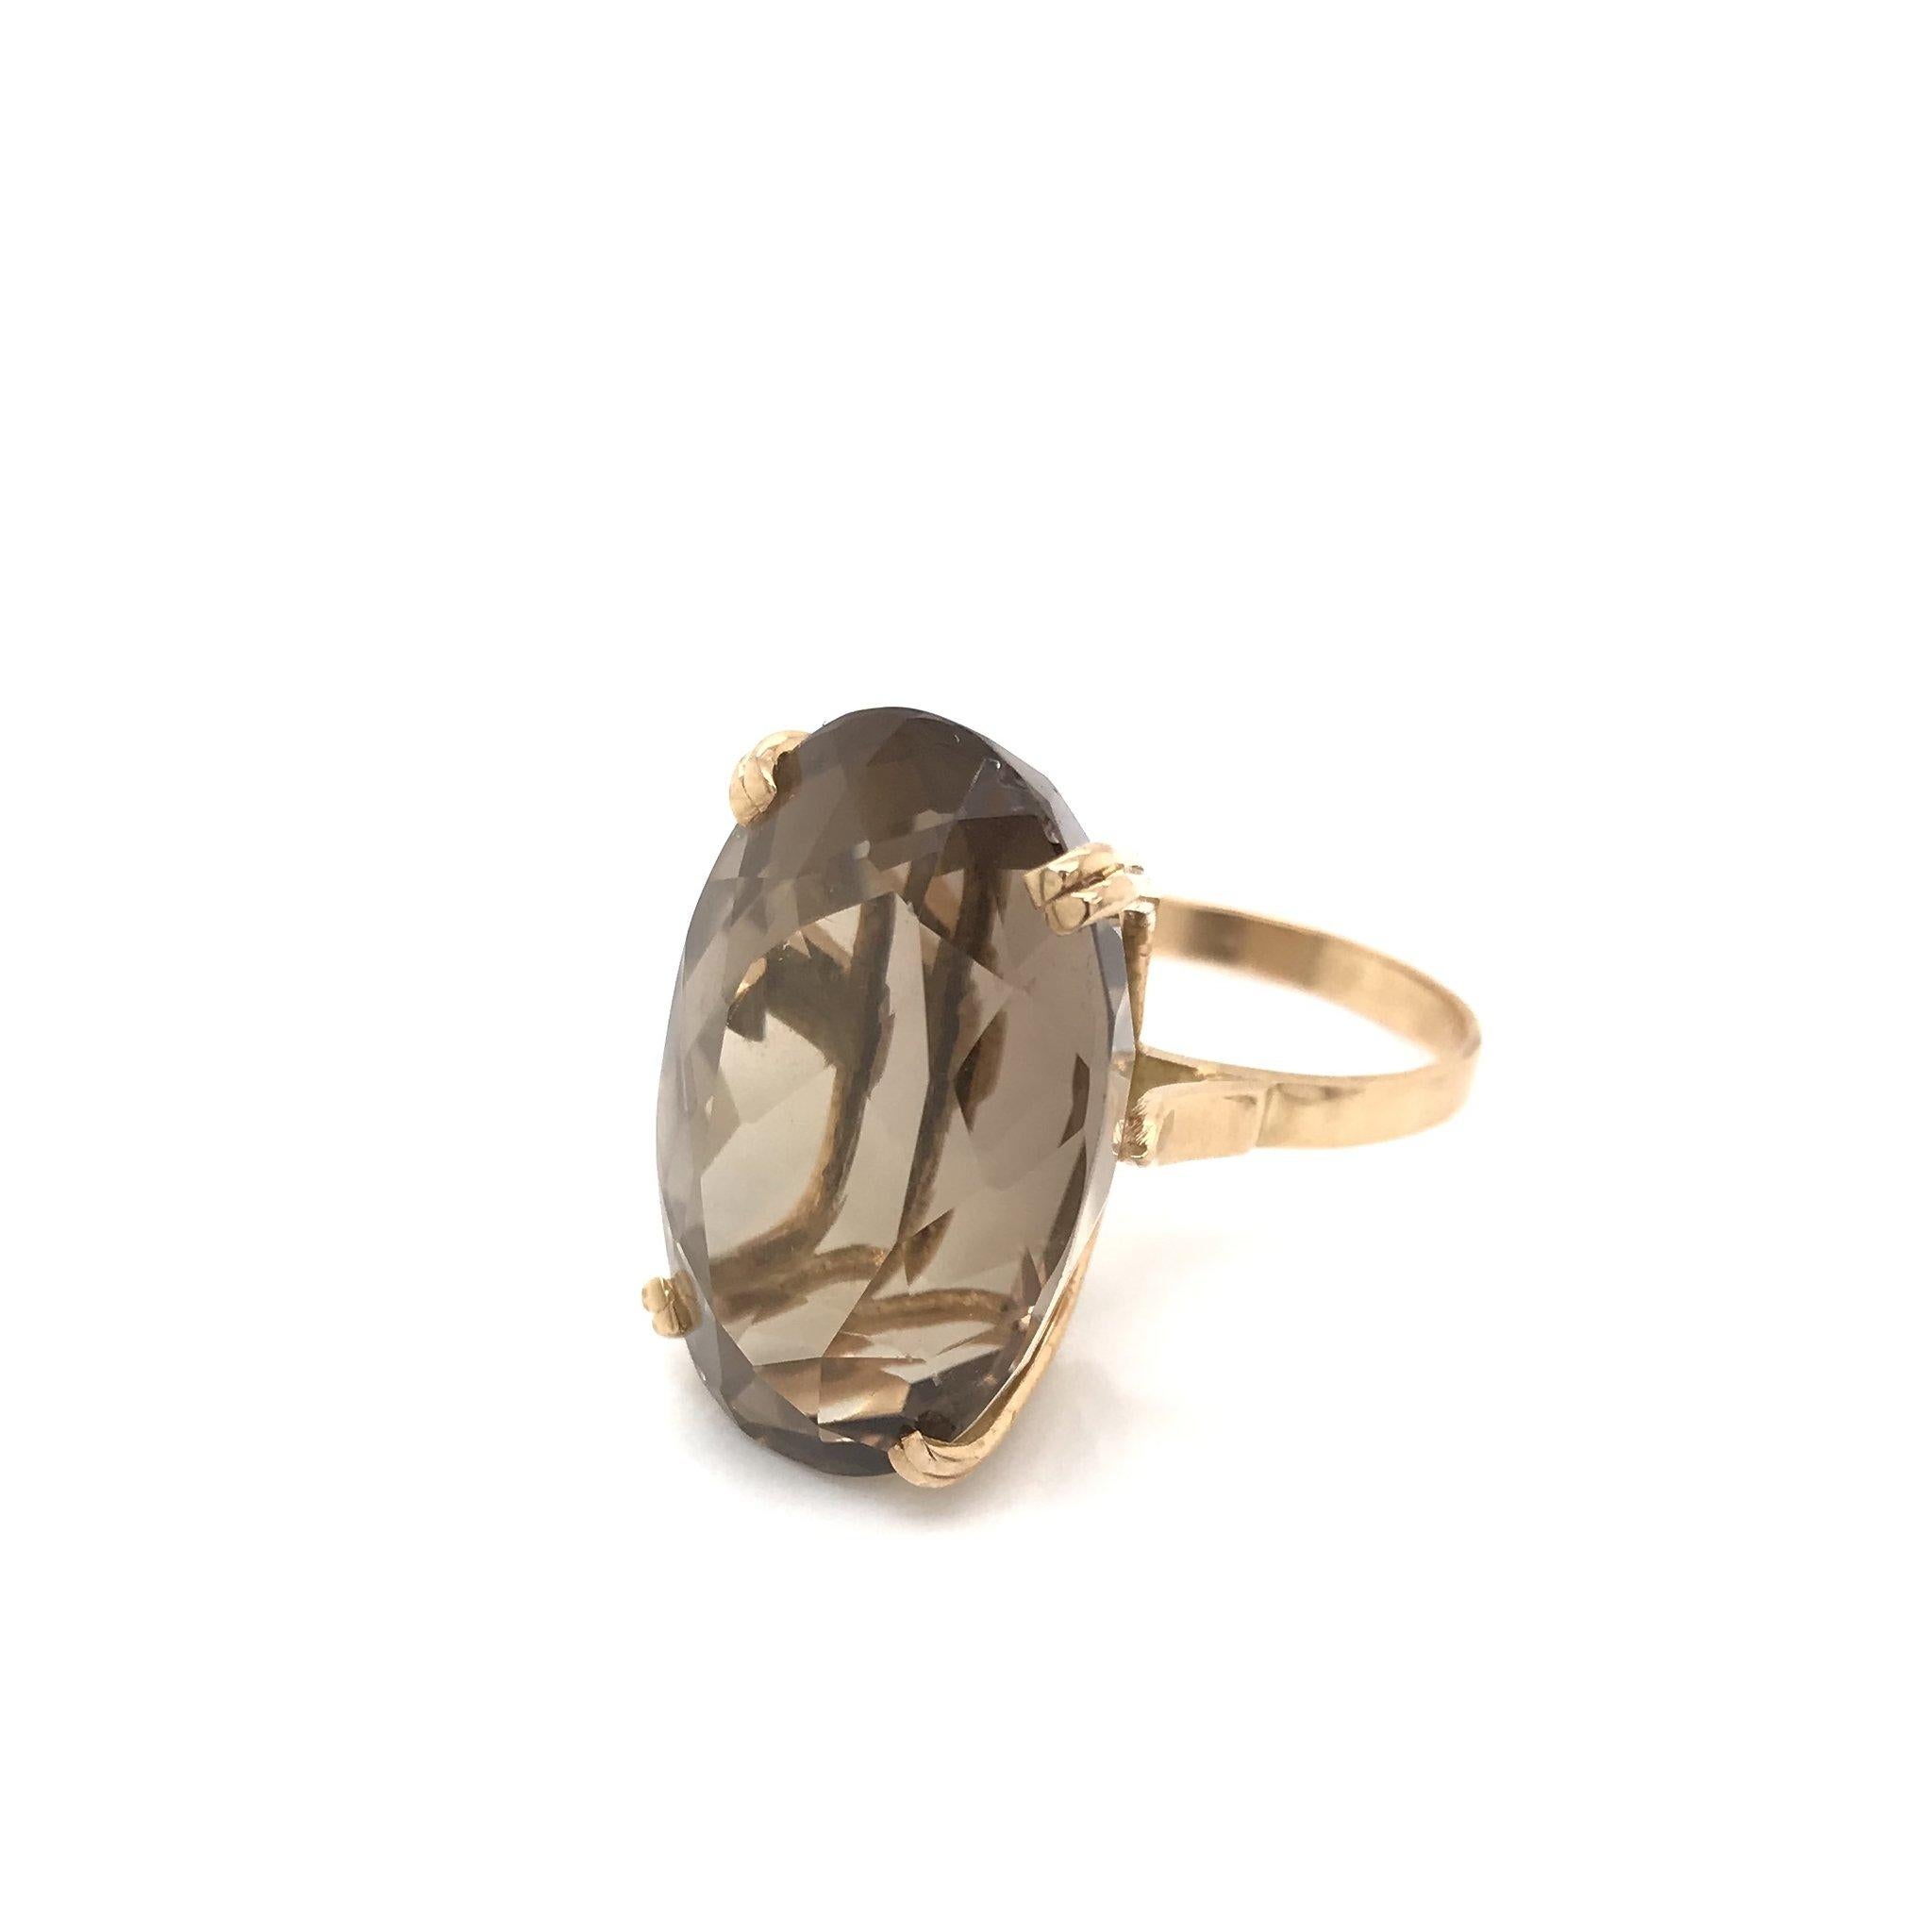 This bold and beautiful cocktail ring was crafted sometime during the Mid Century design period ( 1940-1960 ). The simple solitaire setting is 18k gold and features a large fancy cut smoky quartz. During the Mid century period smoky quartz was